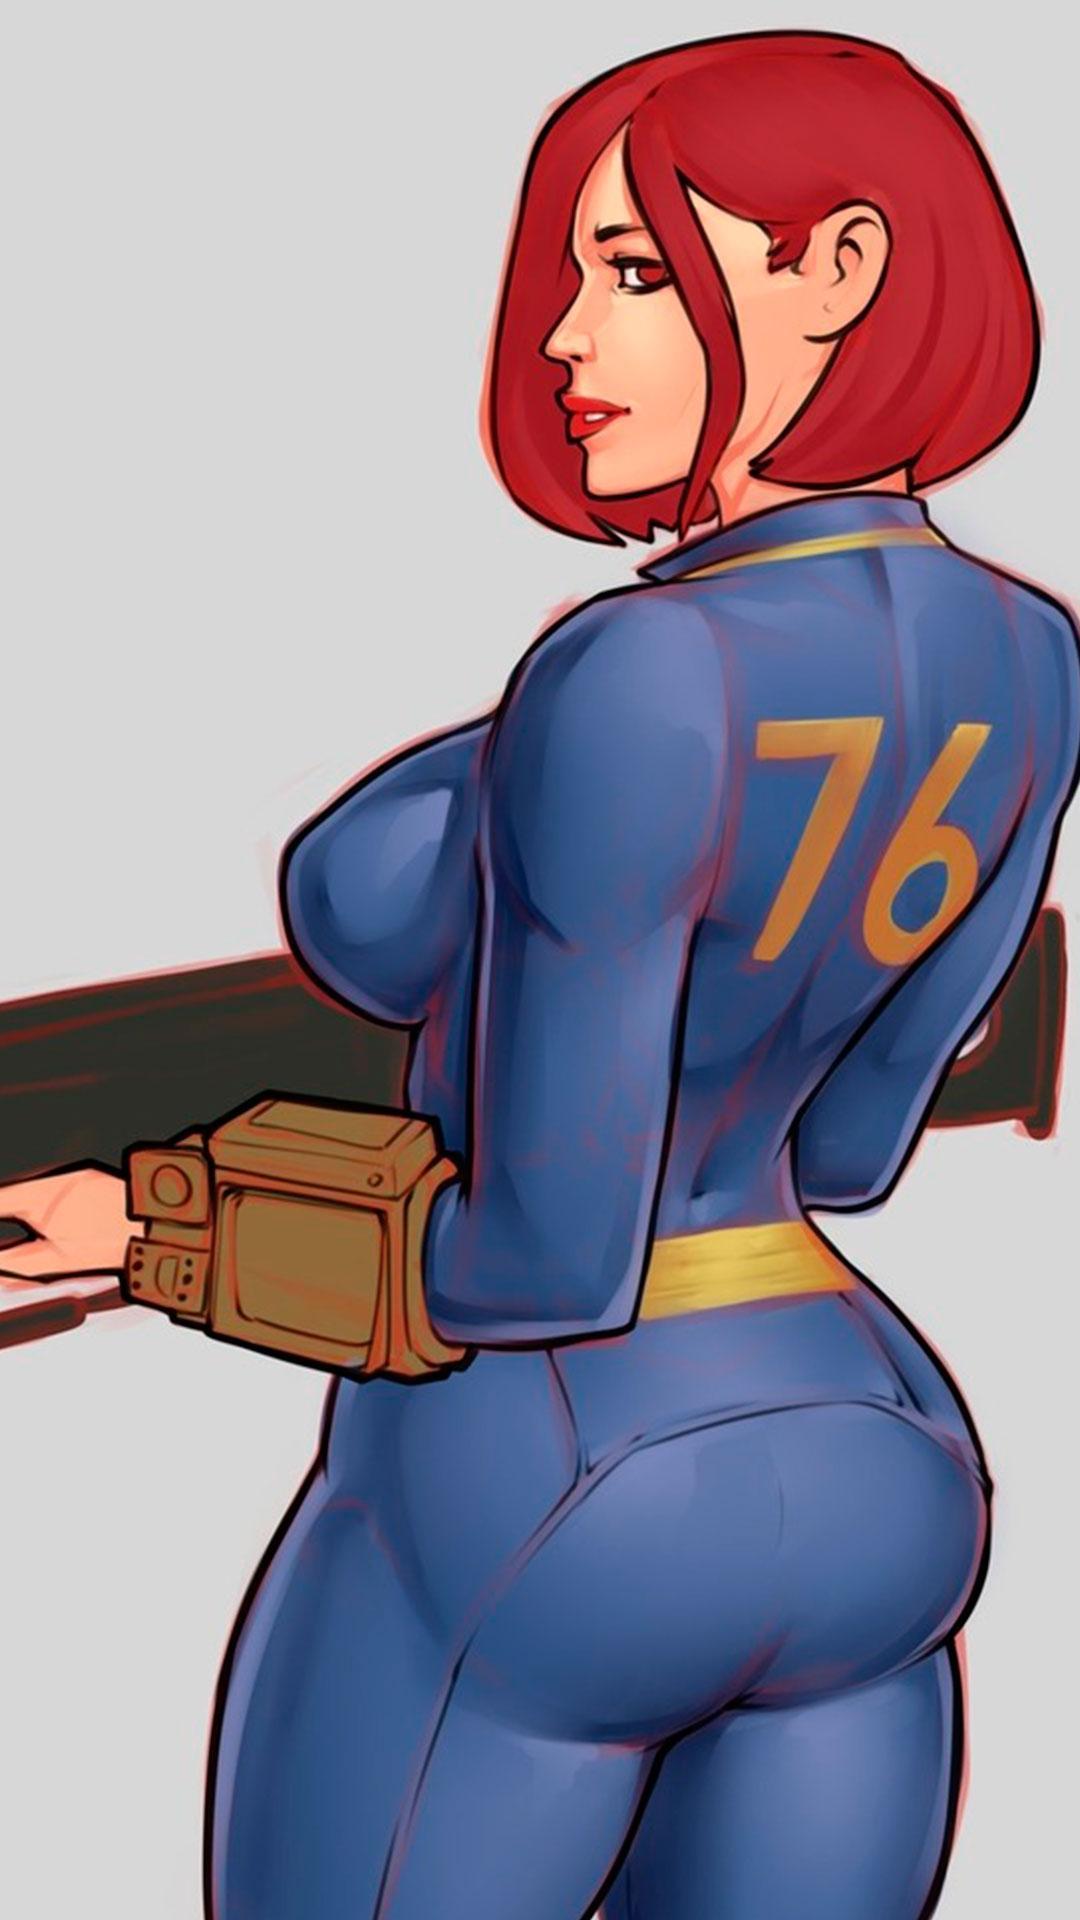 Rule 34 best. Fallout 4 Shadman арт. Фоллаут 76 арт. Фоллаут 34. Ваулт гёрл.